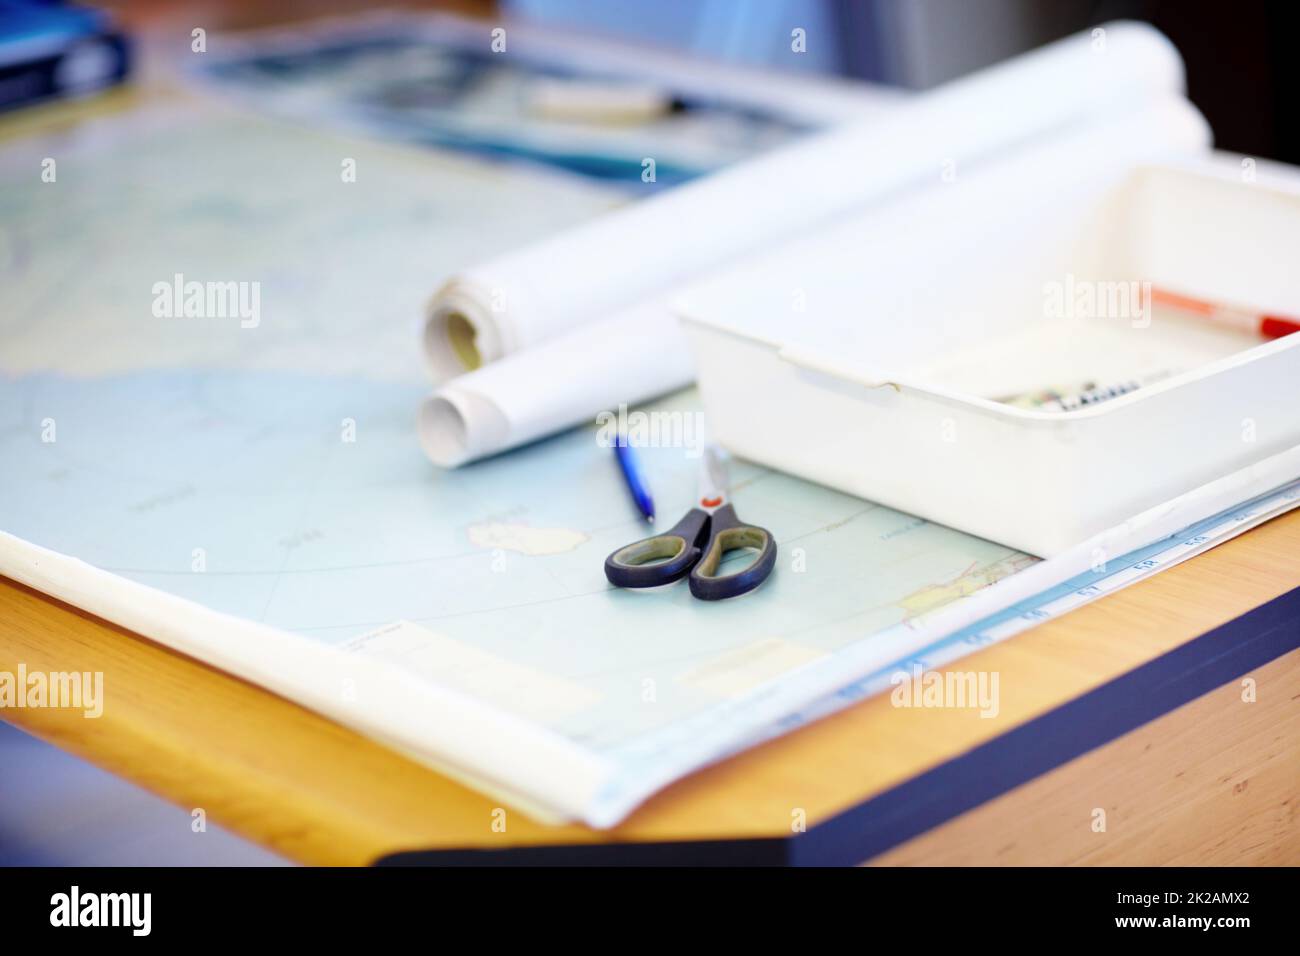 Lifeguards always need to have a map on hand. High angle shot of a map and stationary lying on a desk inside a lifeguard office. Stock Photo